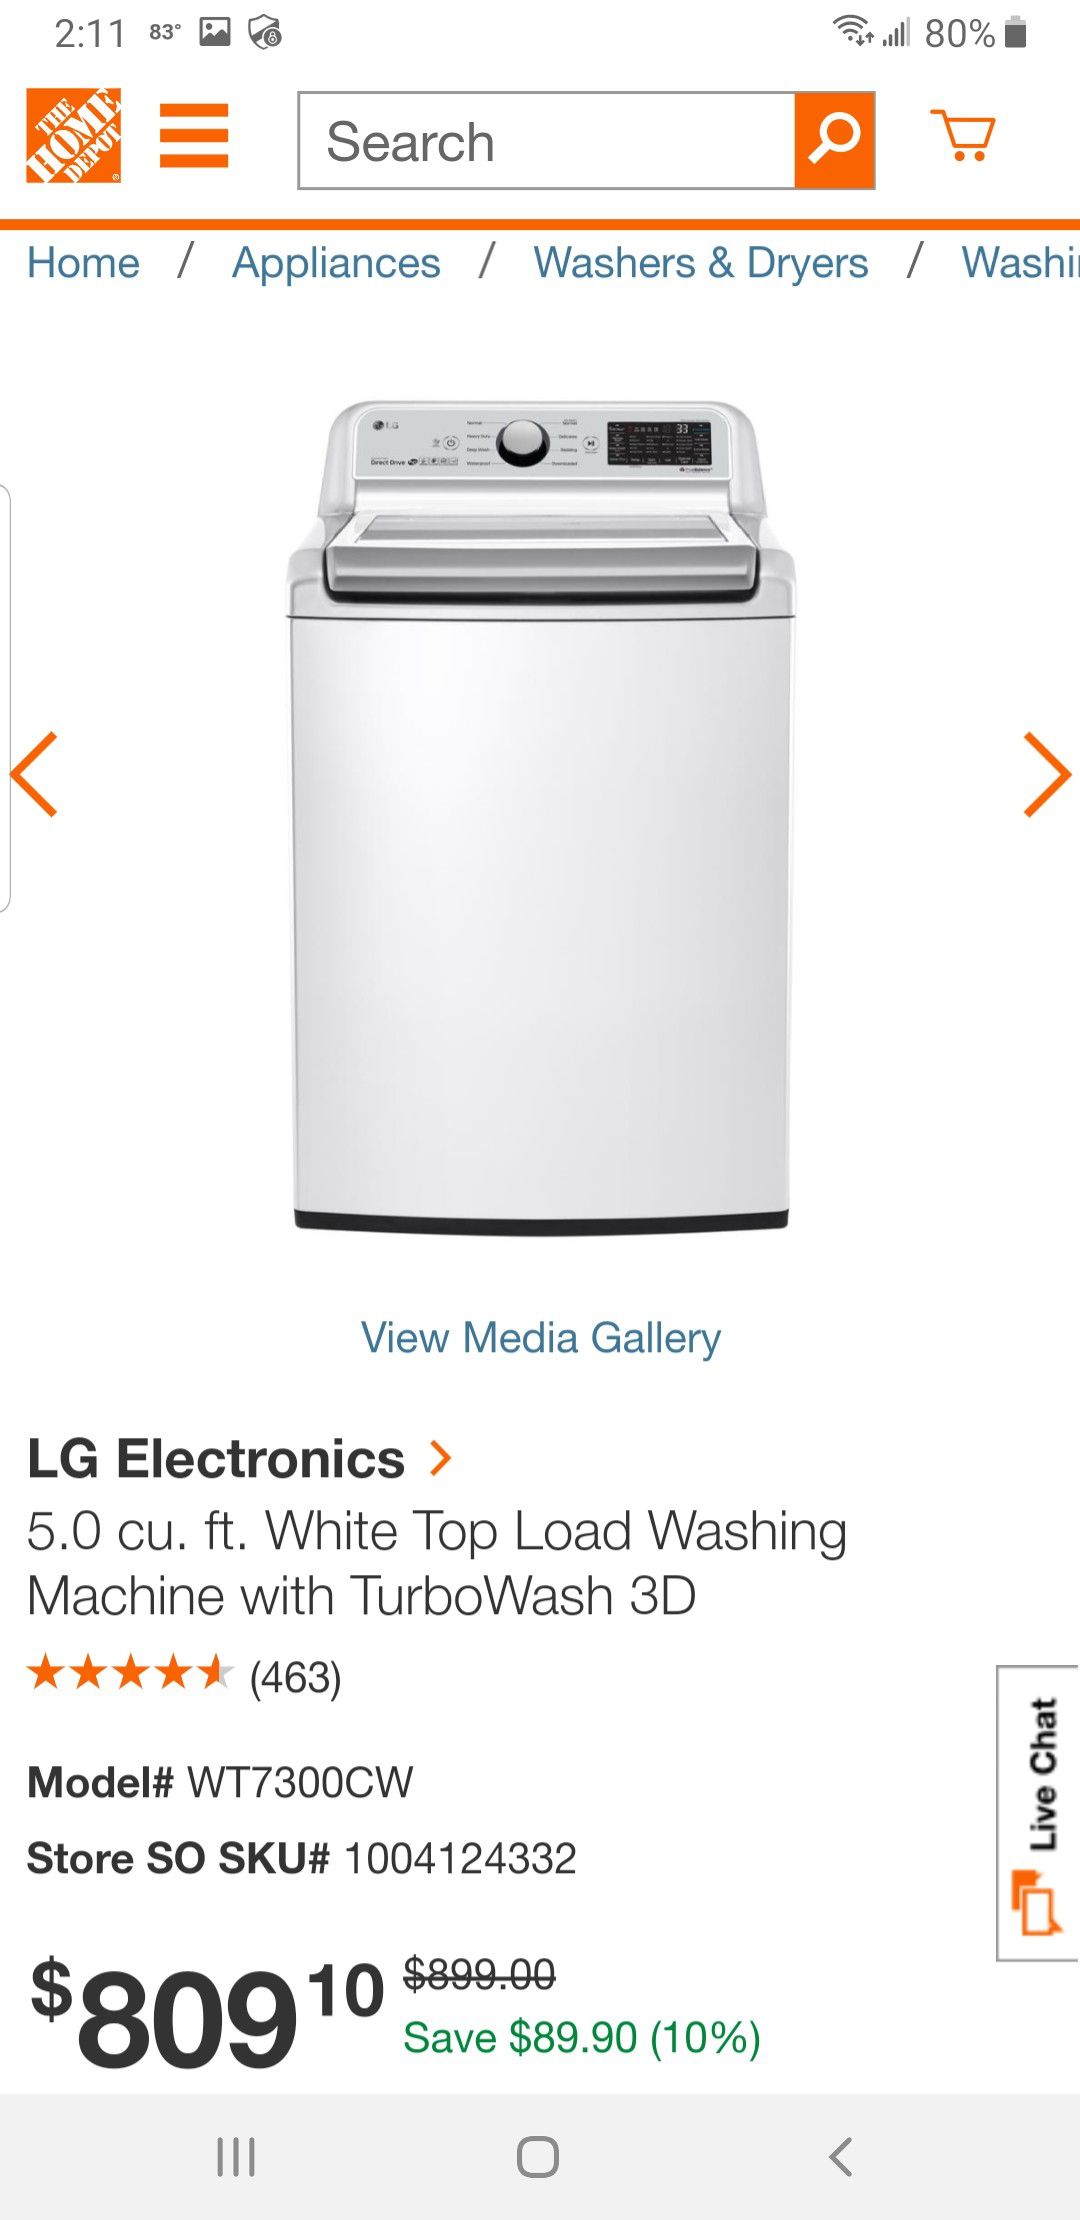 1 year old 2019 LG 5.0 cu. ft. White Top Load Washing Machine with TurboWash 3D